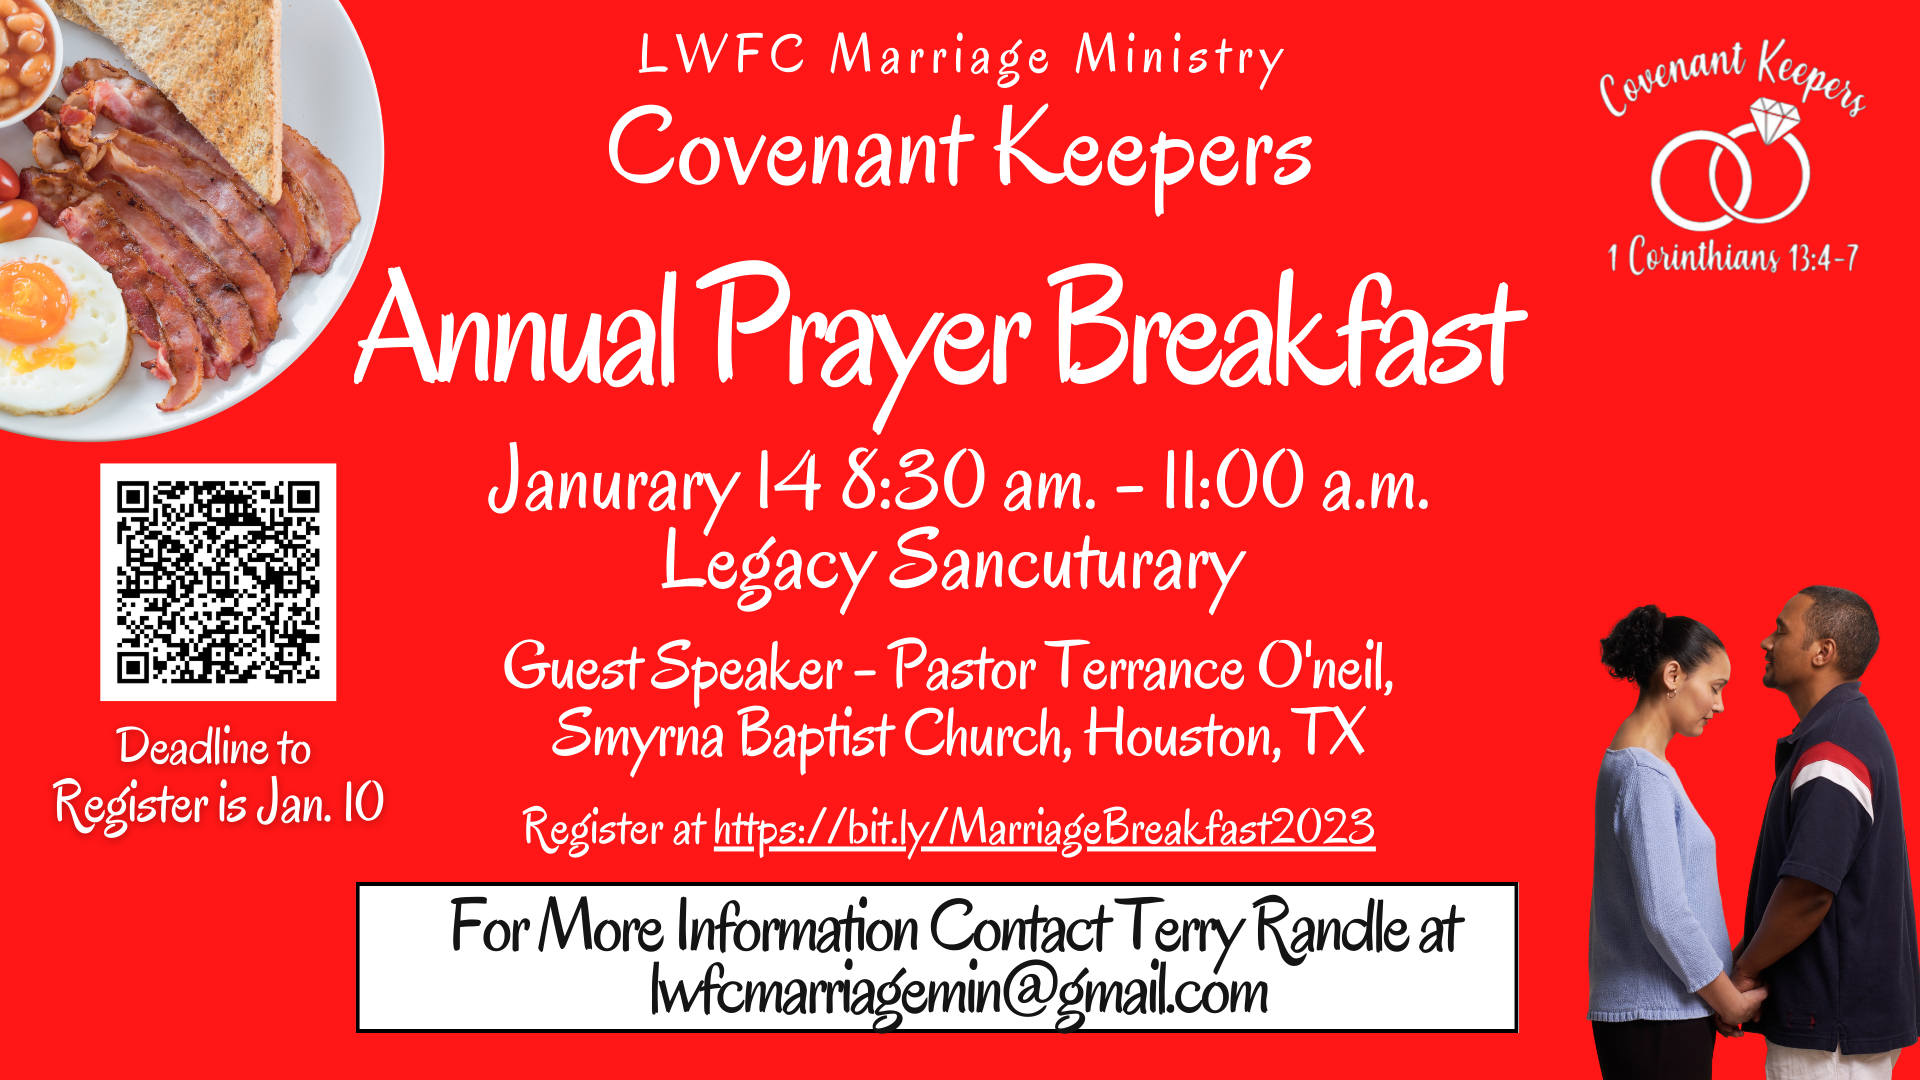 Marriage Ministry Annual Prayer Breakfast head image